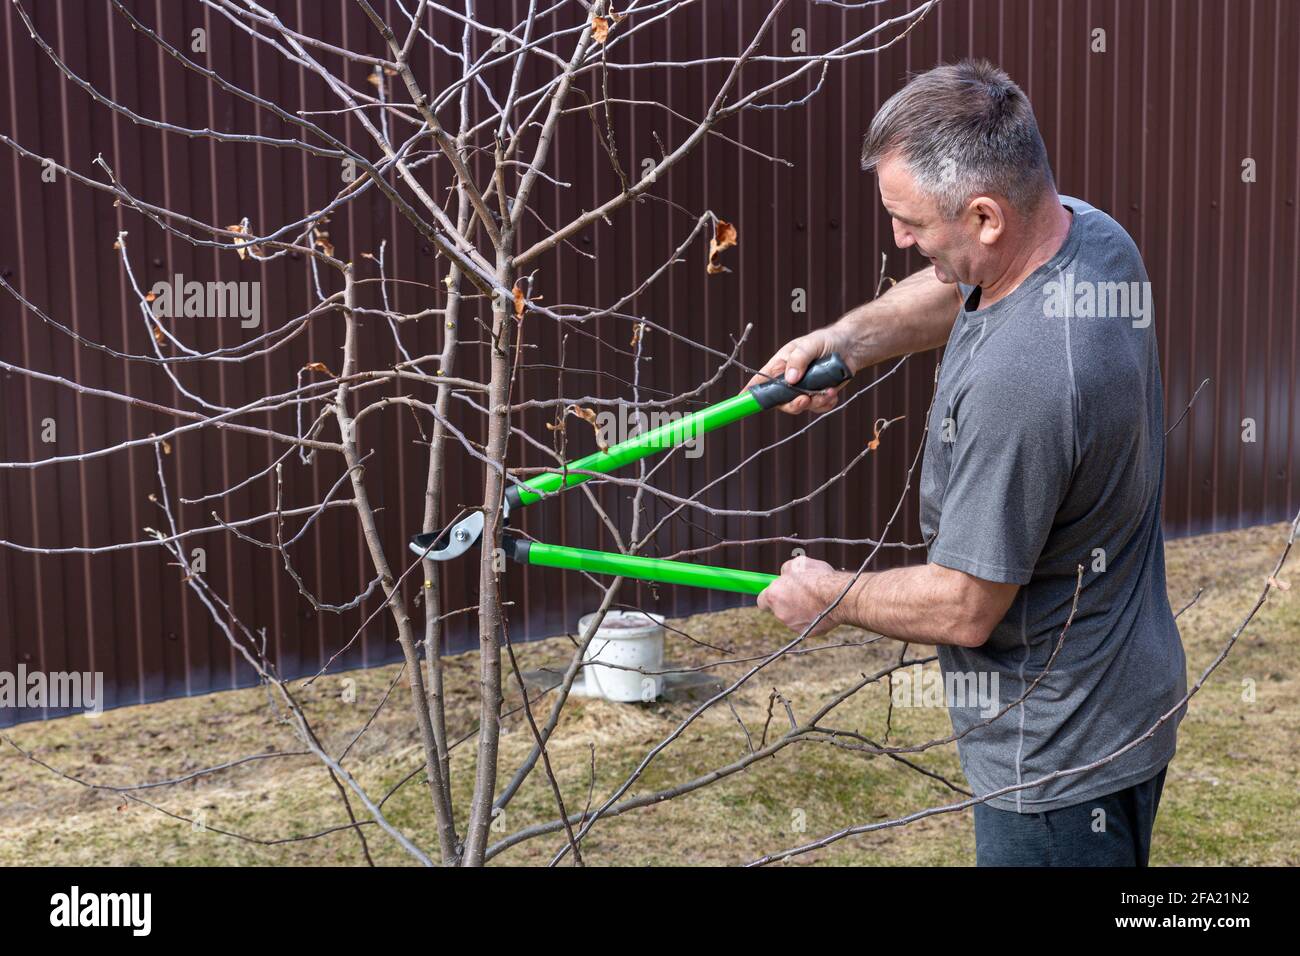 A man of 45-50 years old cuts off the branches of a apple tree with a pruner. Stock Photo